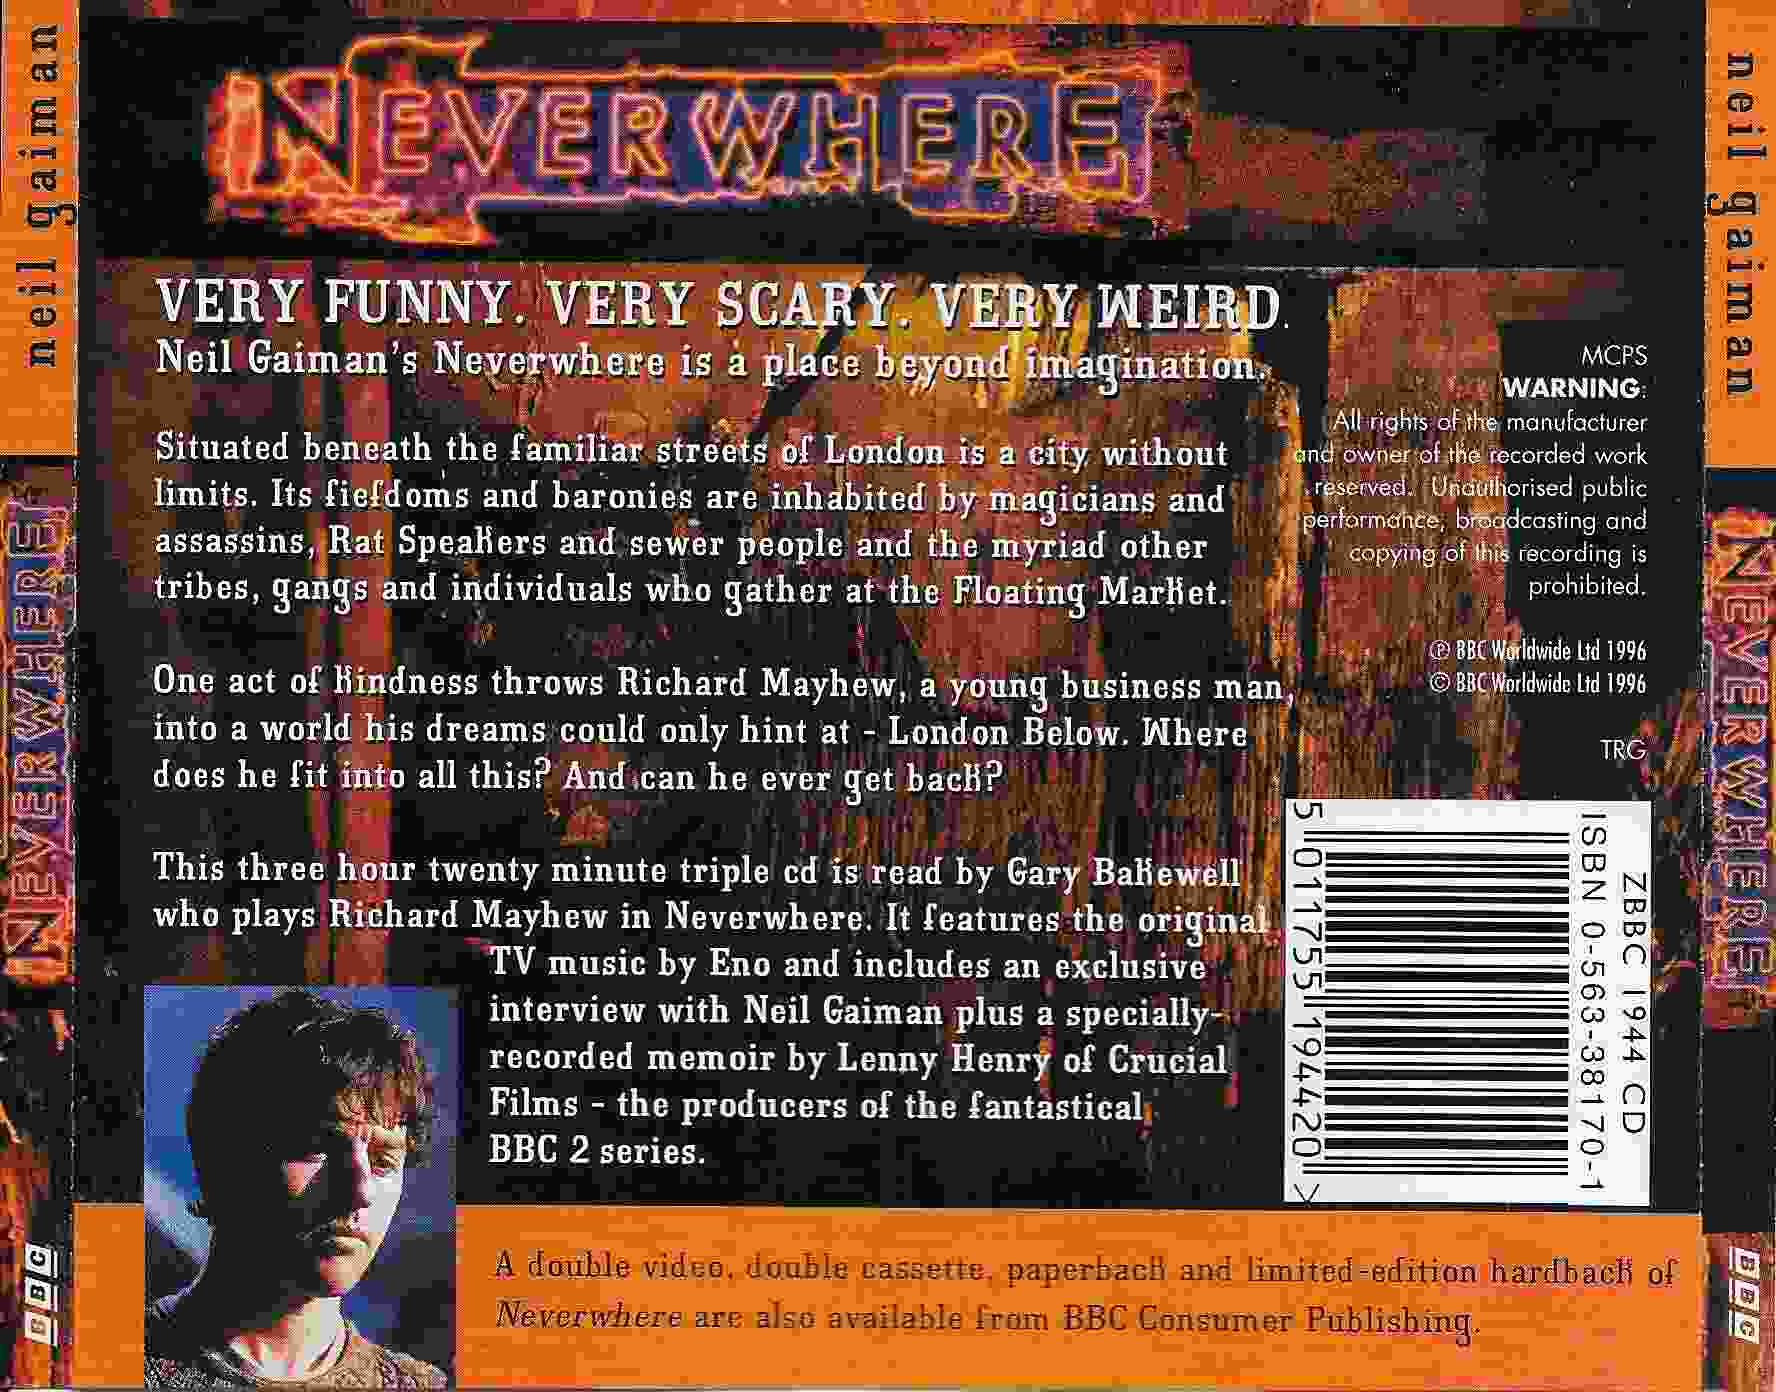 Picture of ZBBC 1944 CD Neverwhere by artist Gary Bakewell from the BBC records and Tapes library